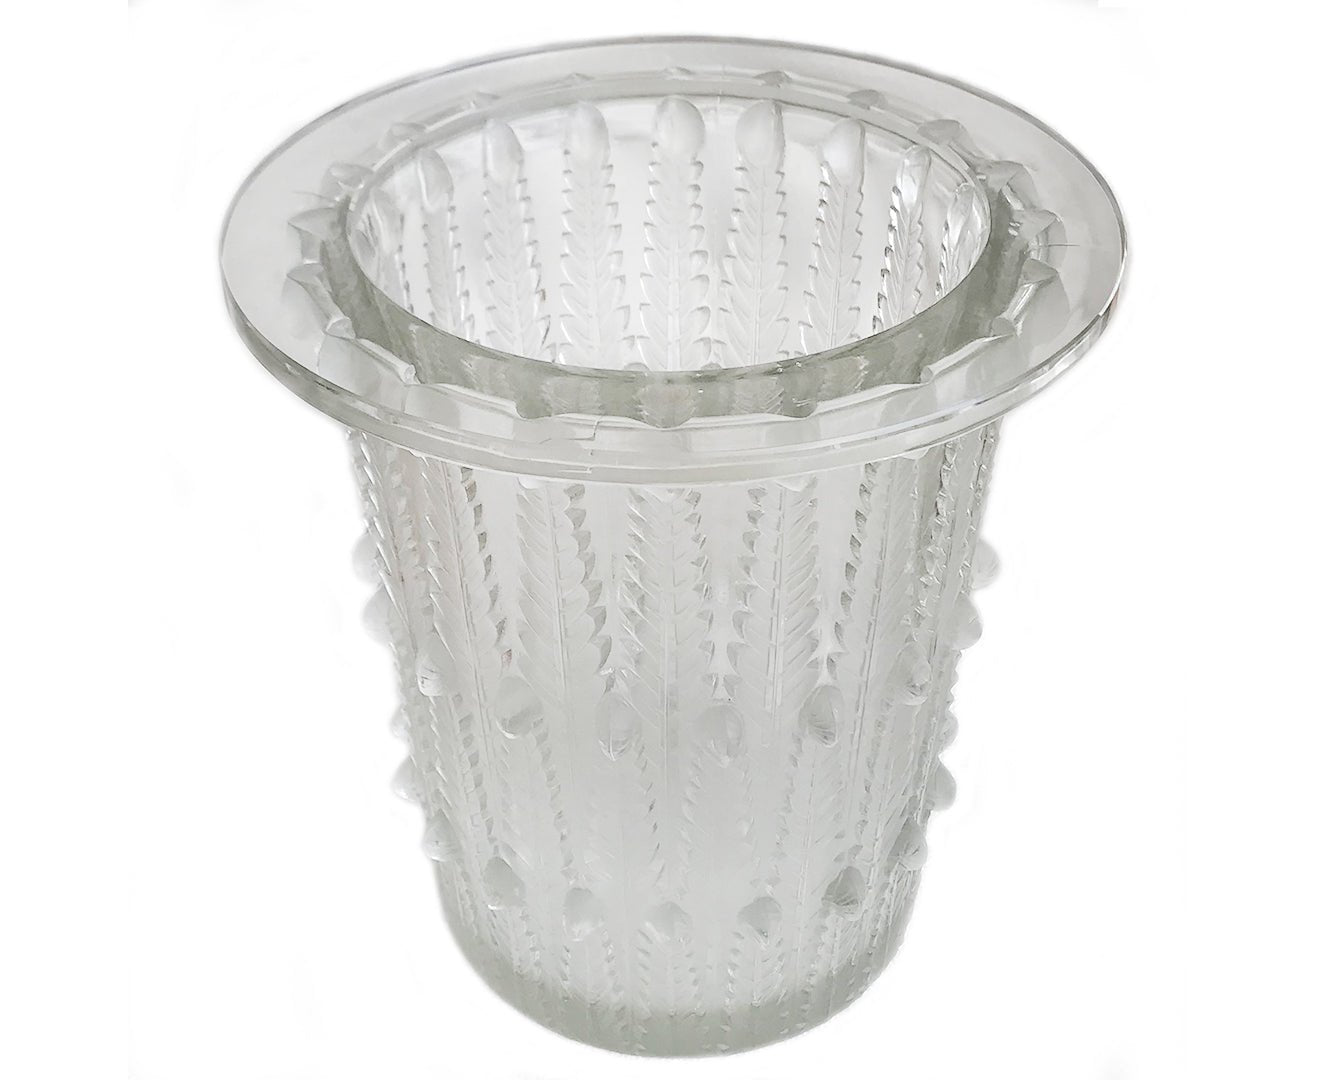 Rene Lalique Fougeres Crystal Ice Bucket